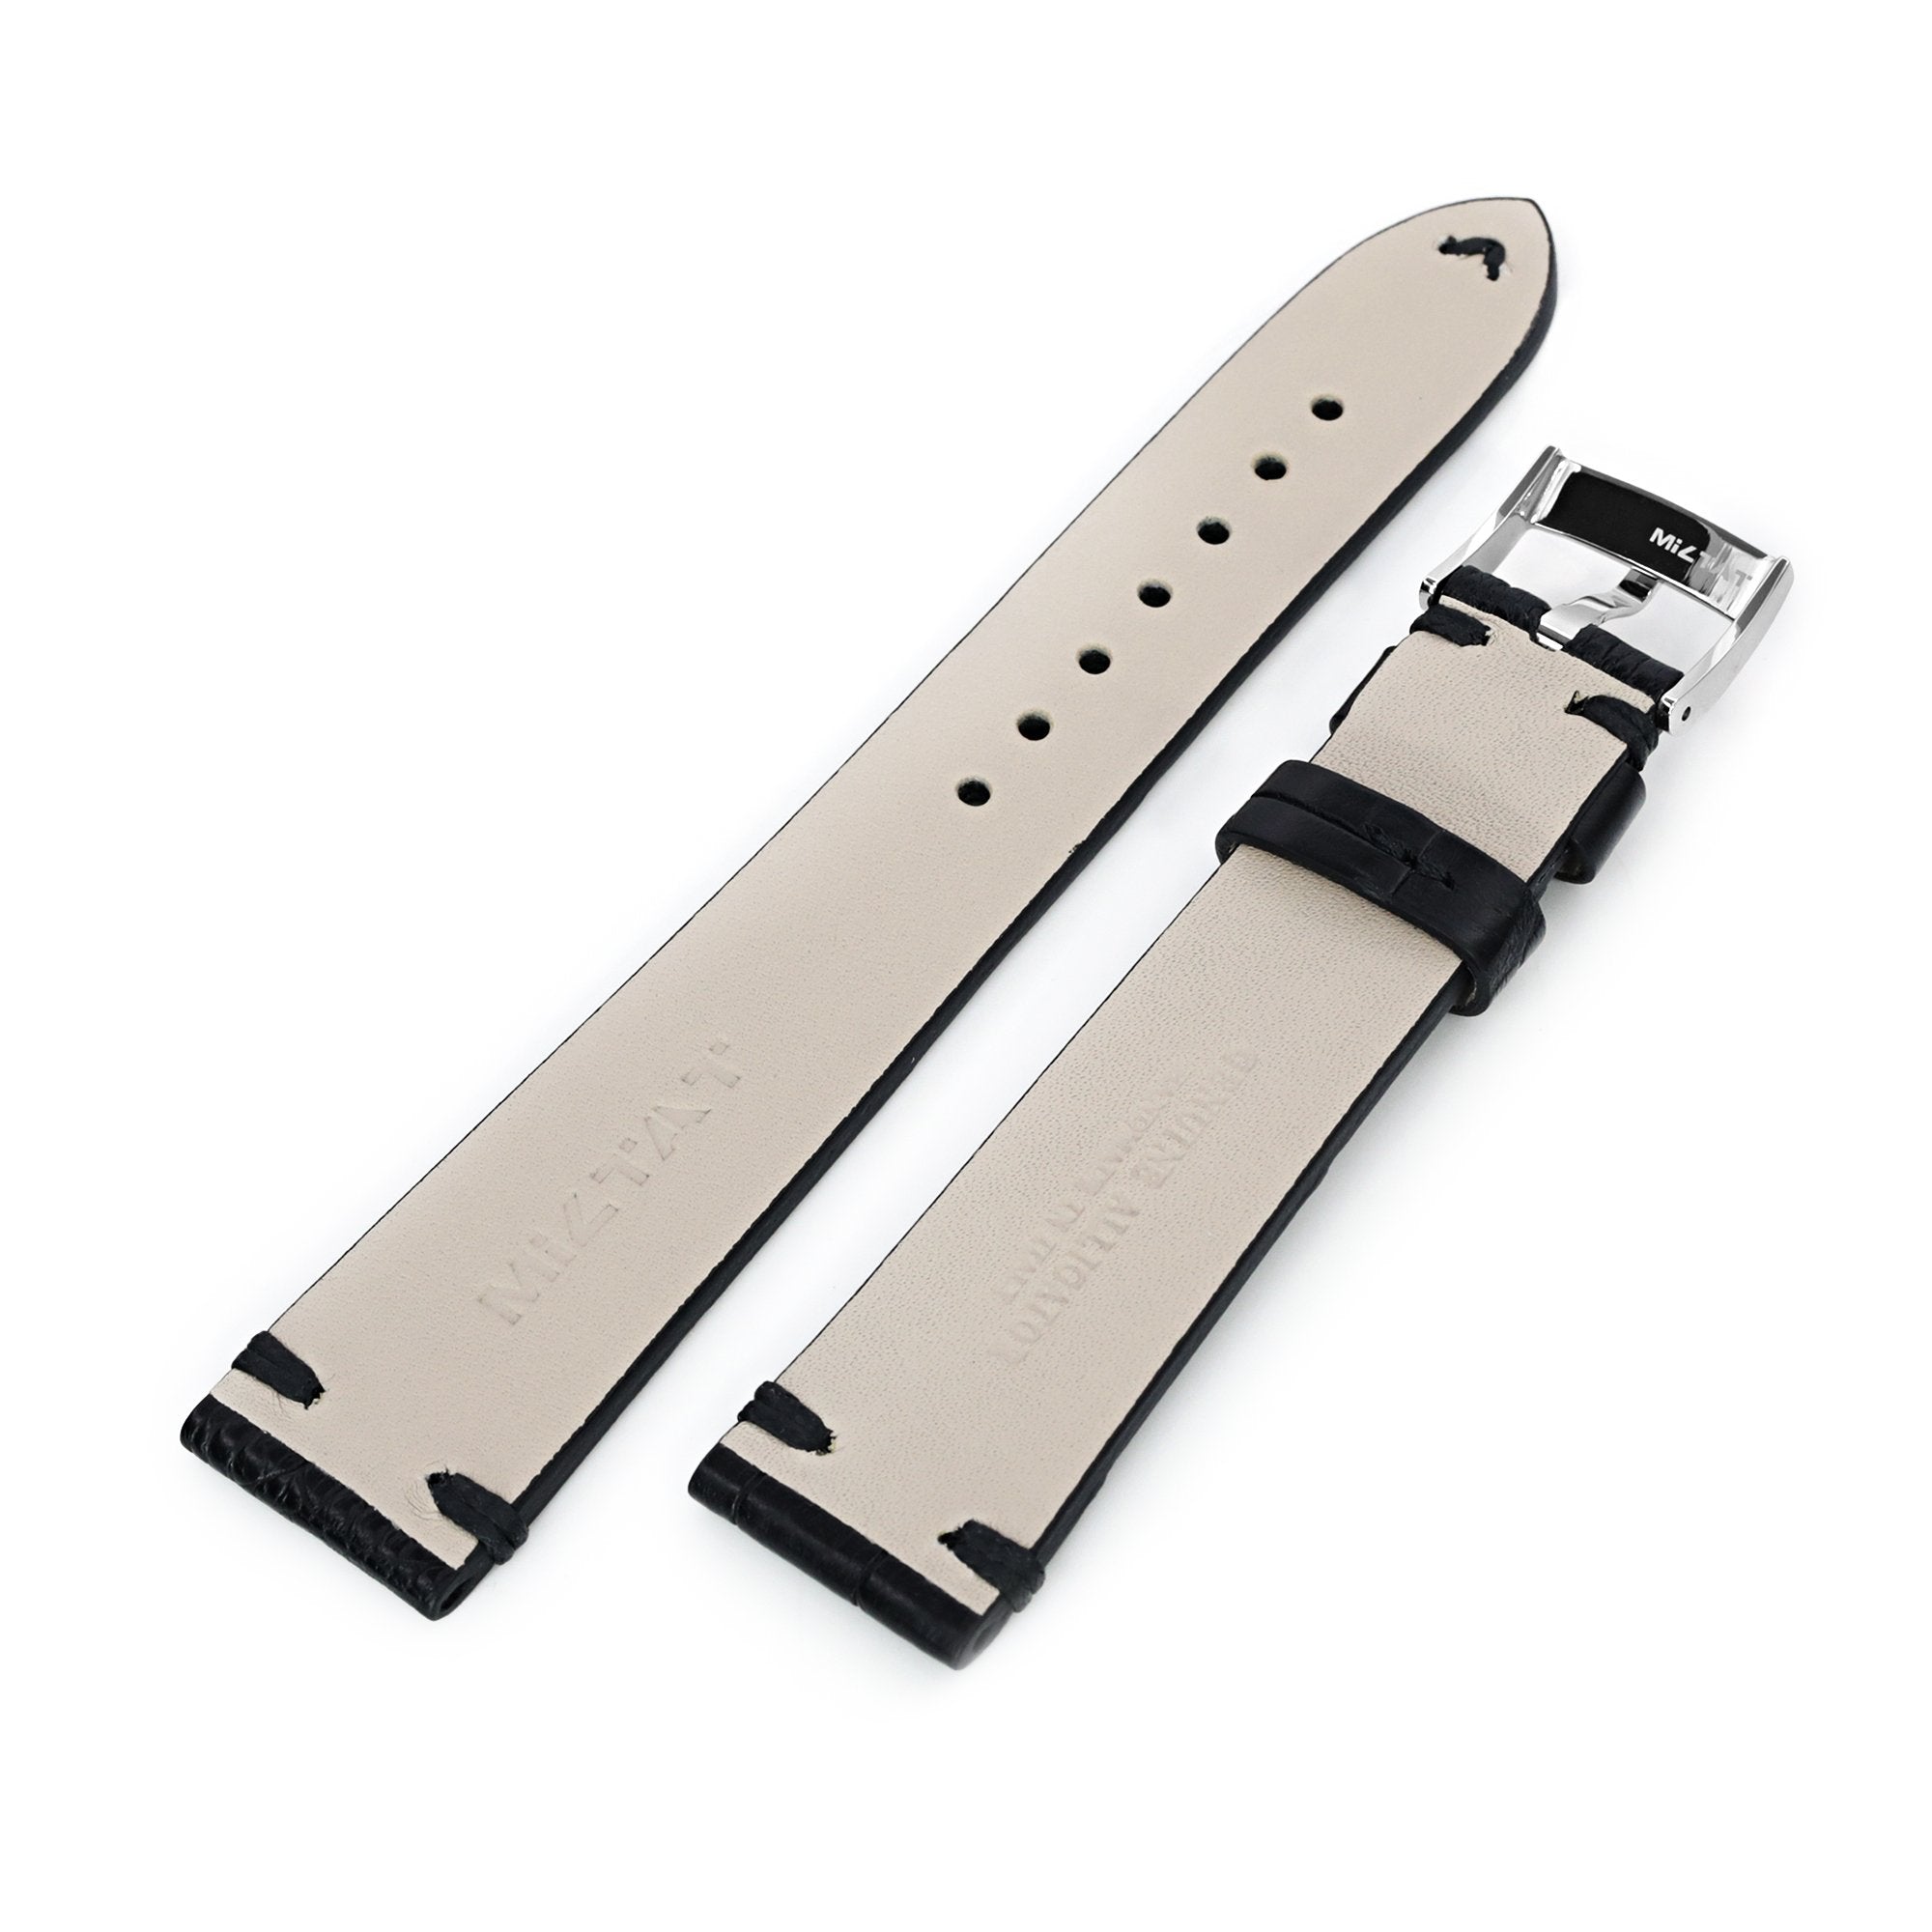 20mm Black Italian Handmade Alligator Belly Watch Band, Same Color Stitching, Polished Buckle Strapcode Watch Bands